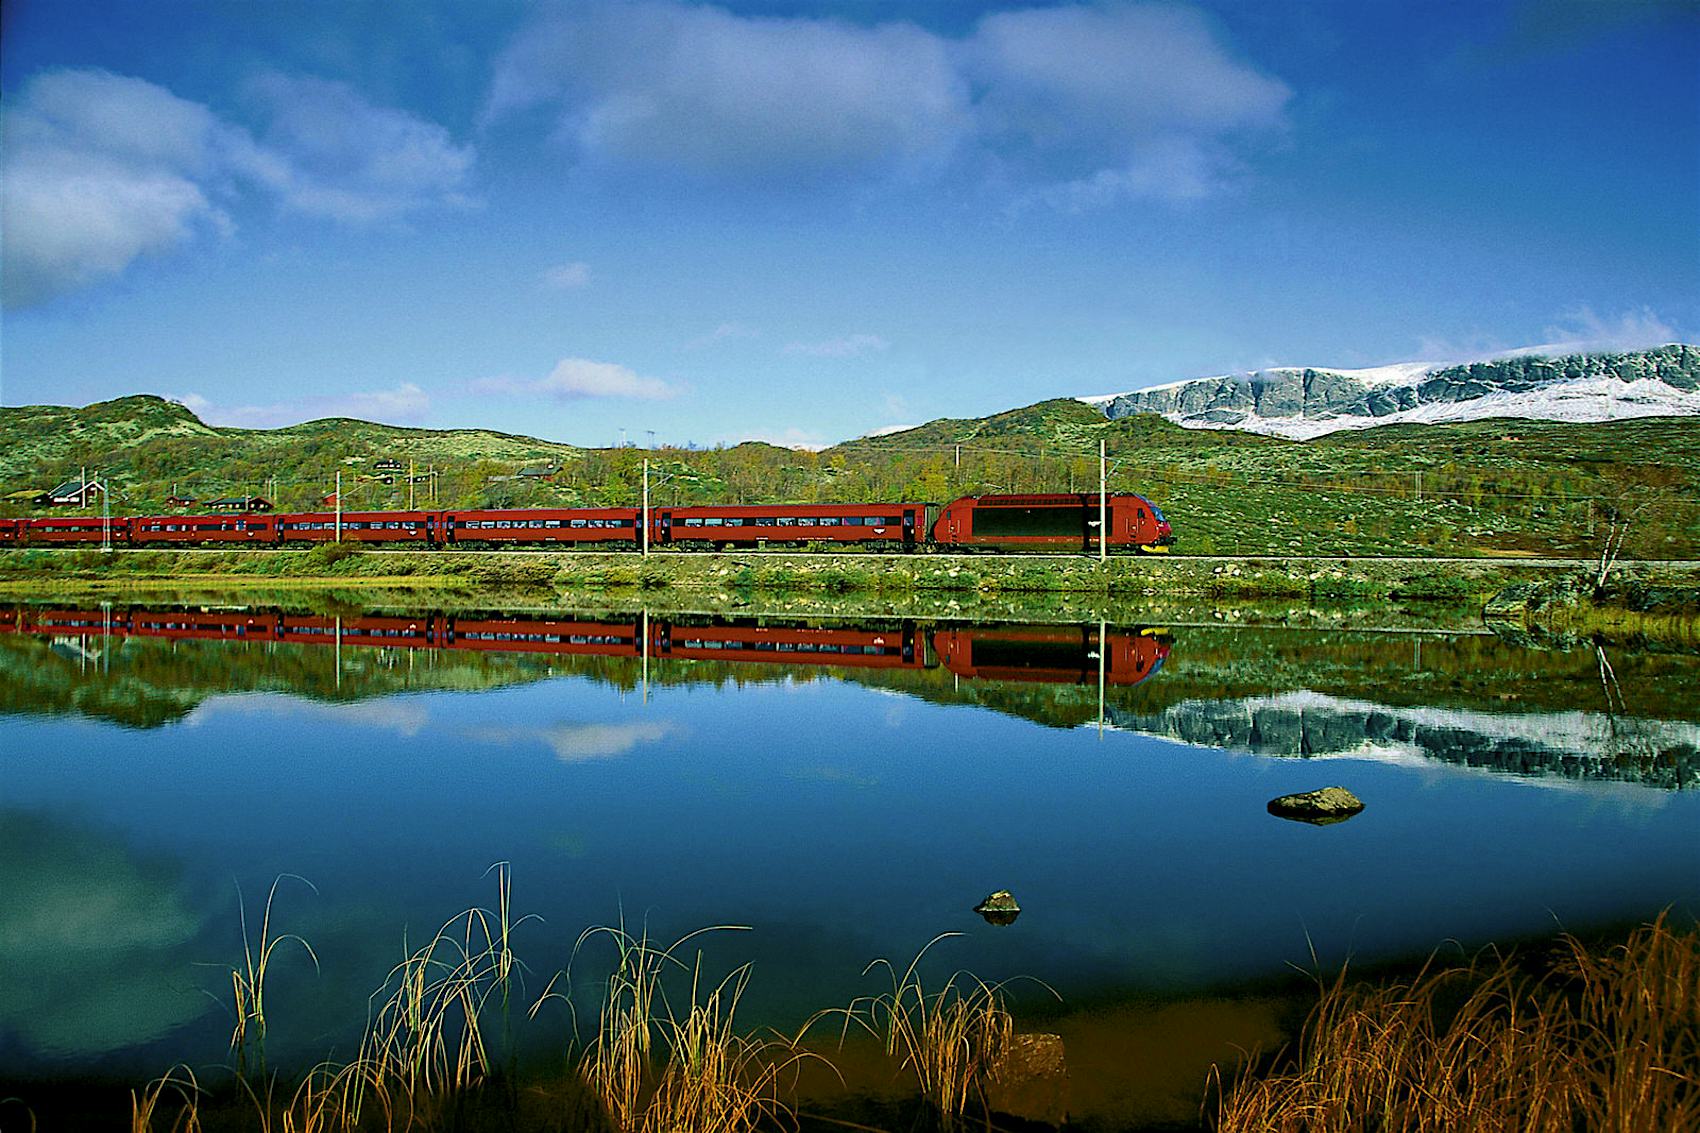 See Norway's natural highlights on the Bergensbanen railway